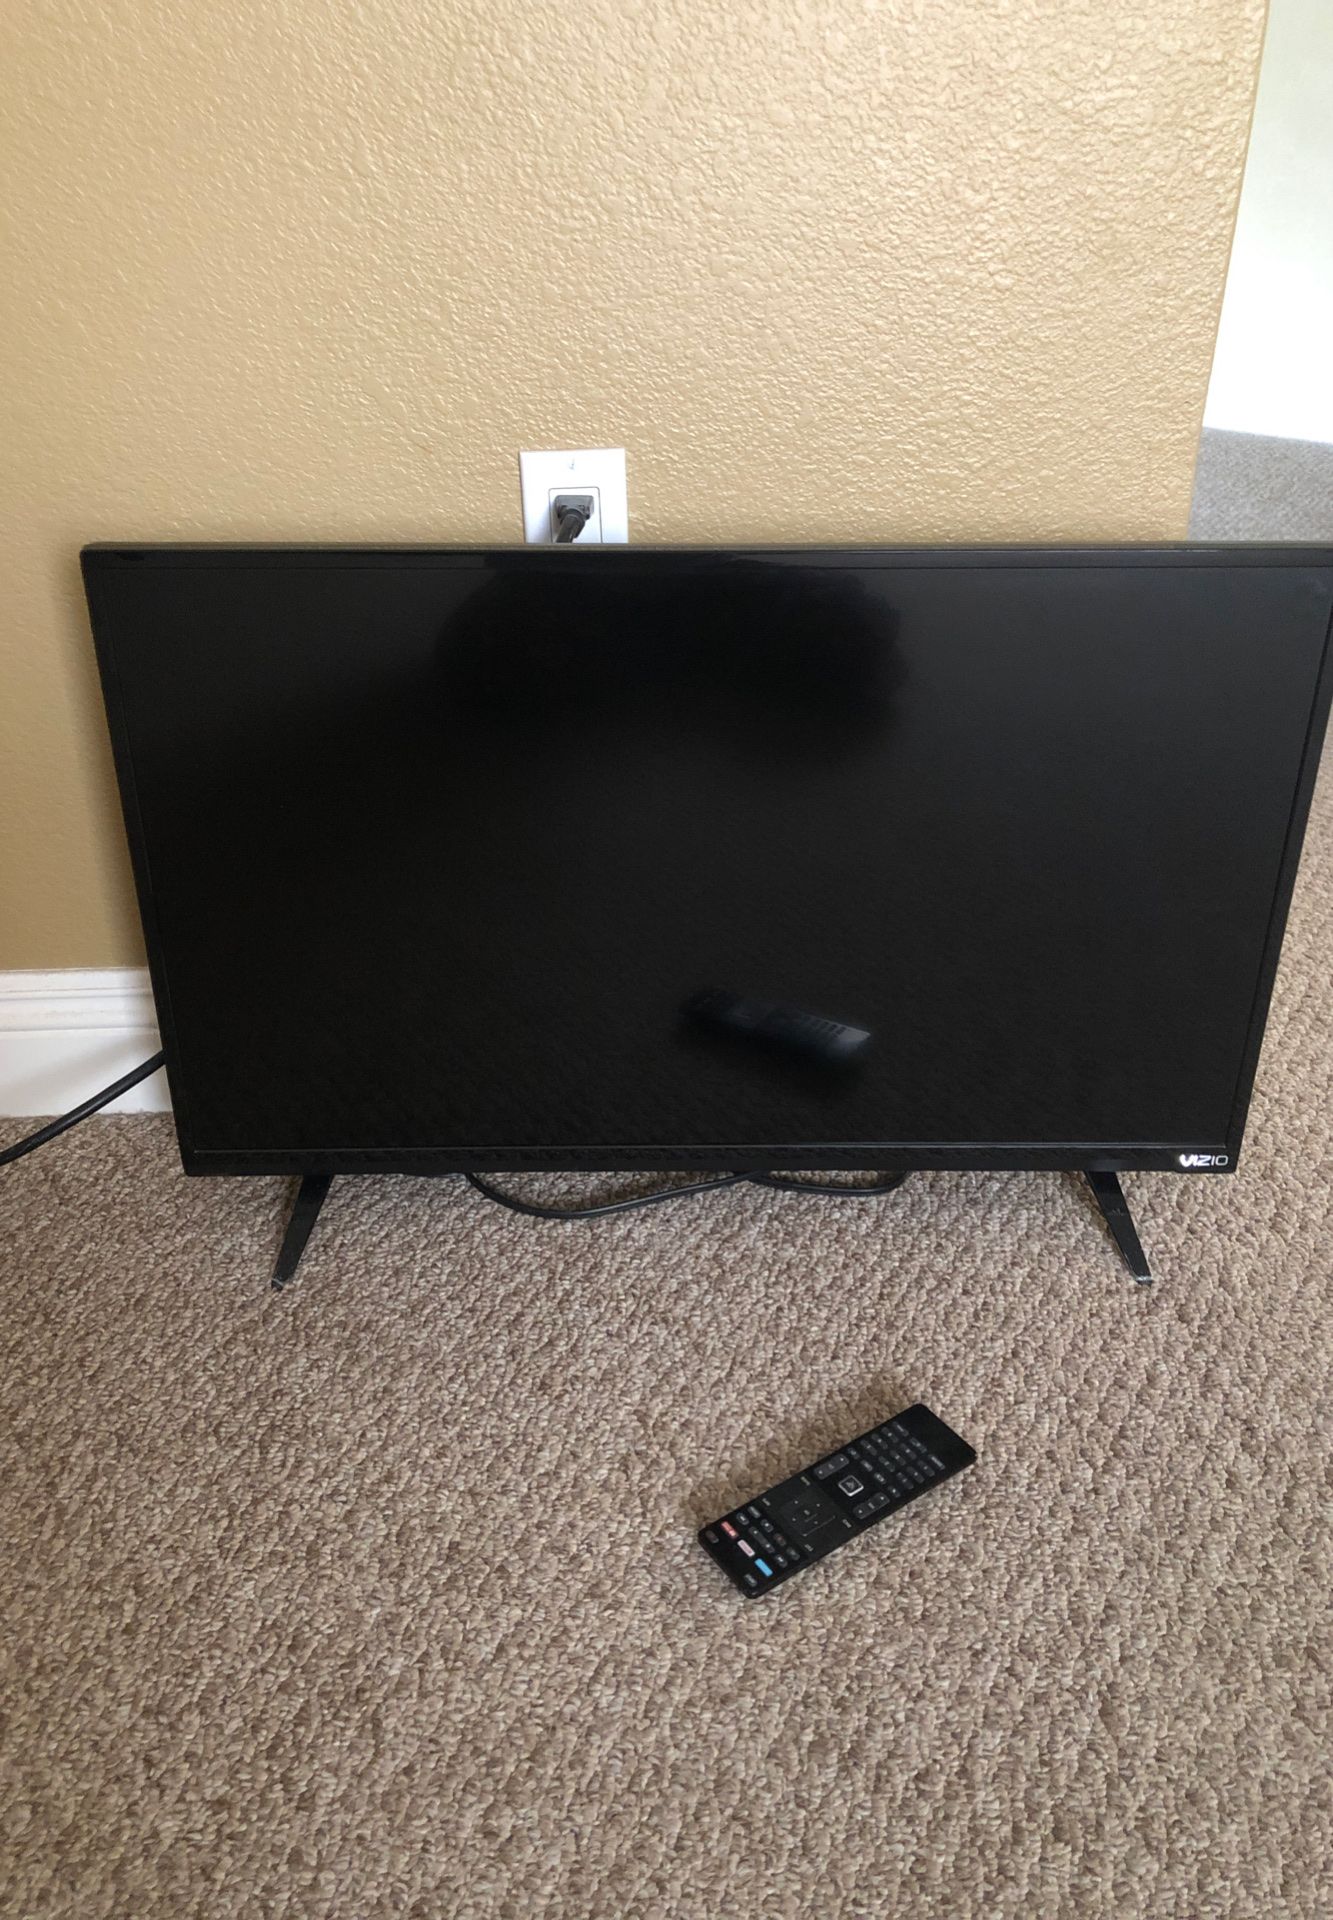 VISIO 28 inch Flat Screen TV with remote